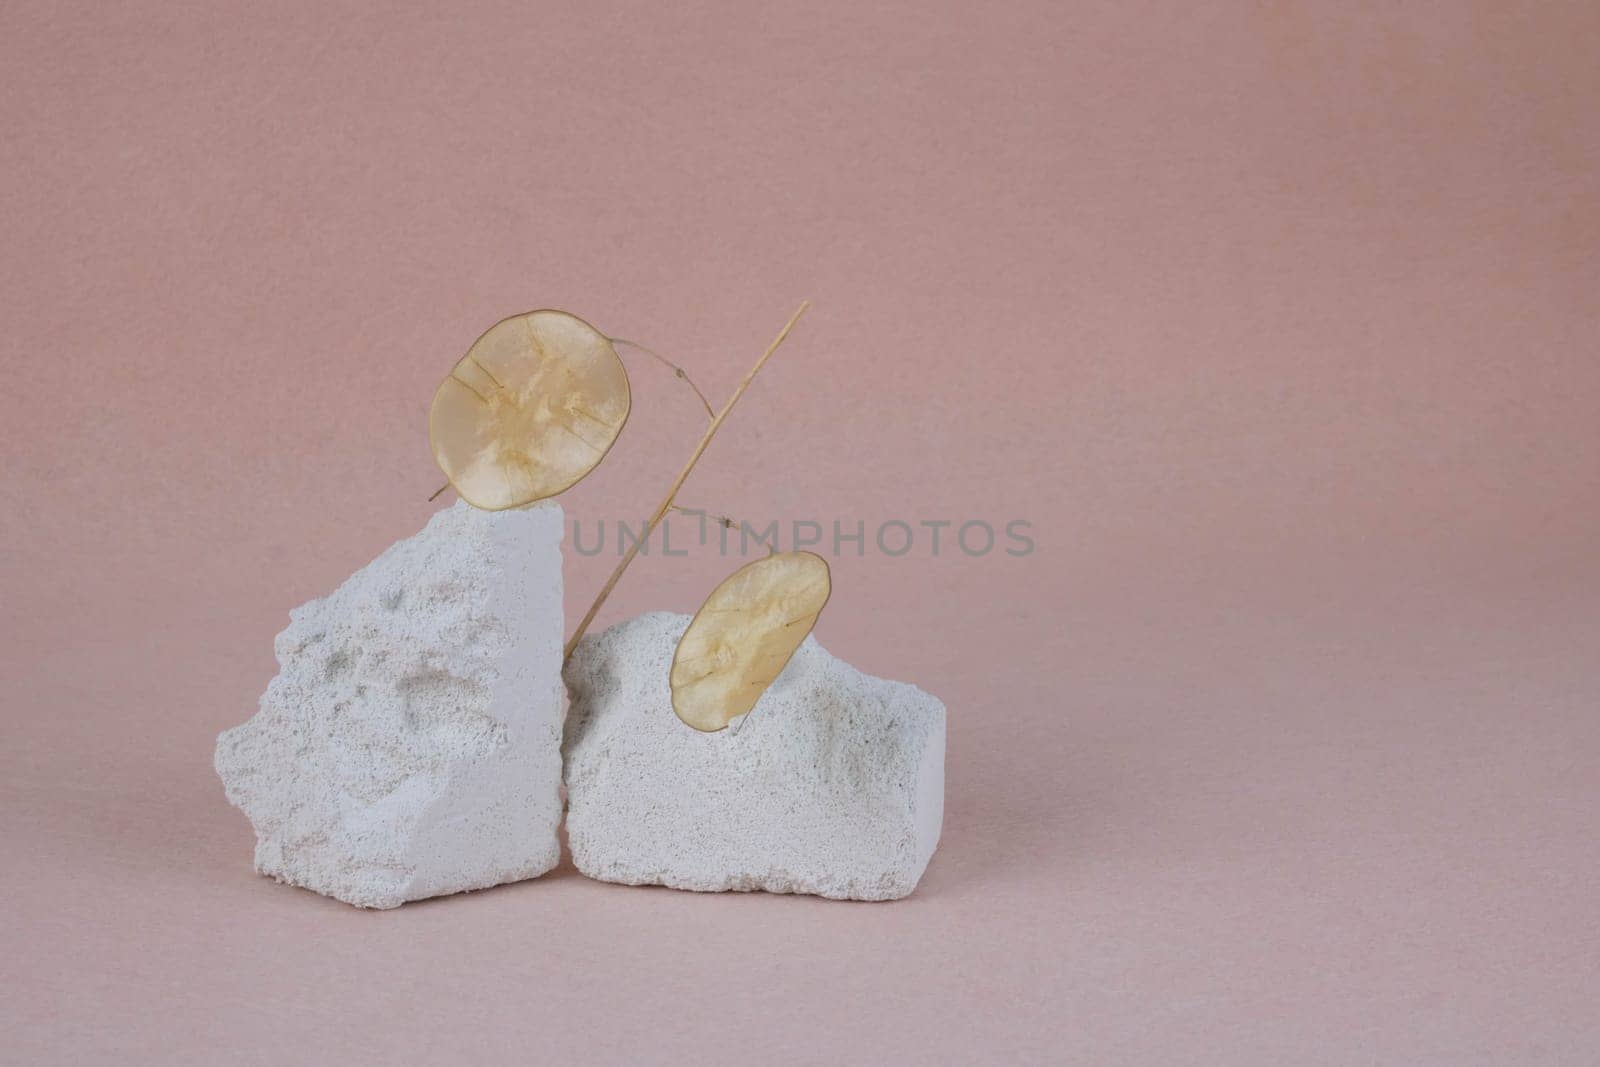 Podium made of white stone with dried flowers on a pink background. Product installation: slabs of broken stone, platform of white stone, placement of objects made of blocks with rough texture. by lapushka62